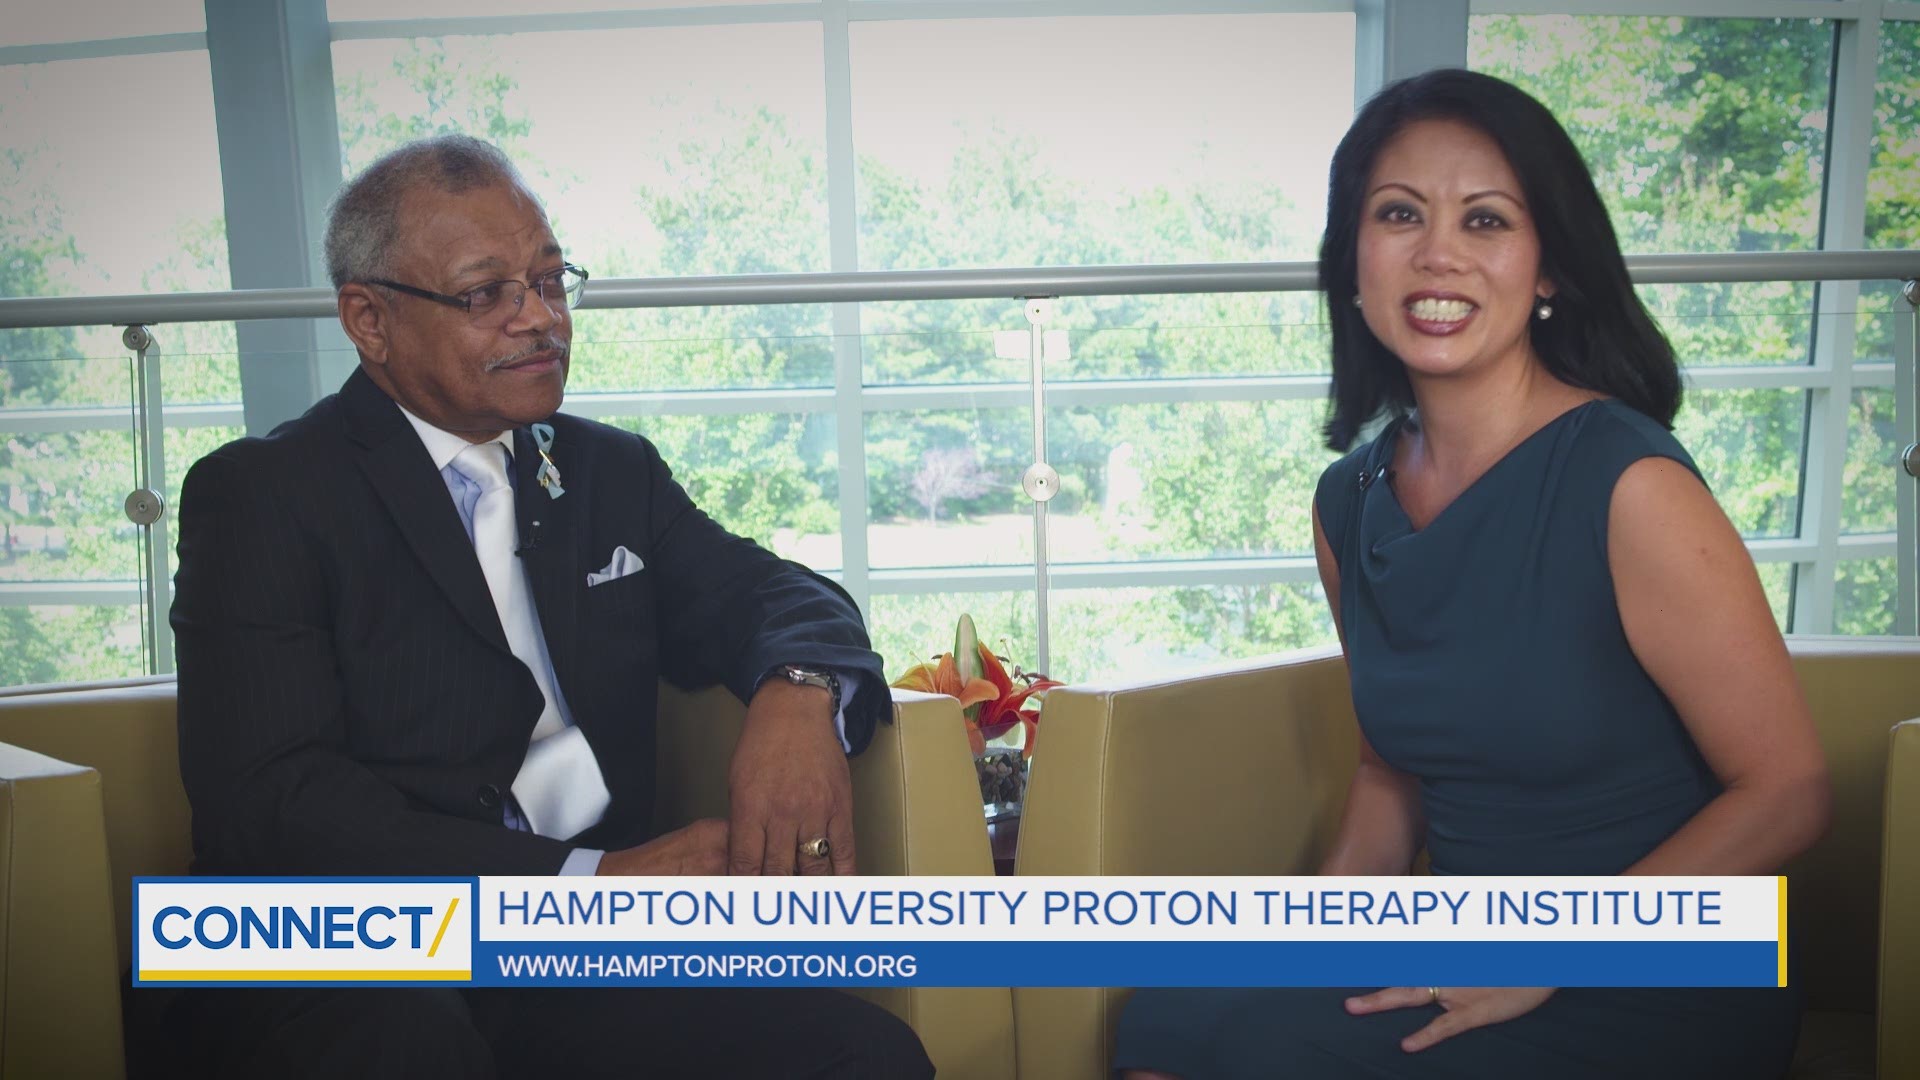 Lawrence Davis told us about how he pushed to receive proton therapy, how he gained more than what he expected, and his mission to help others do the same.